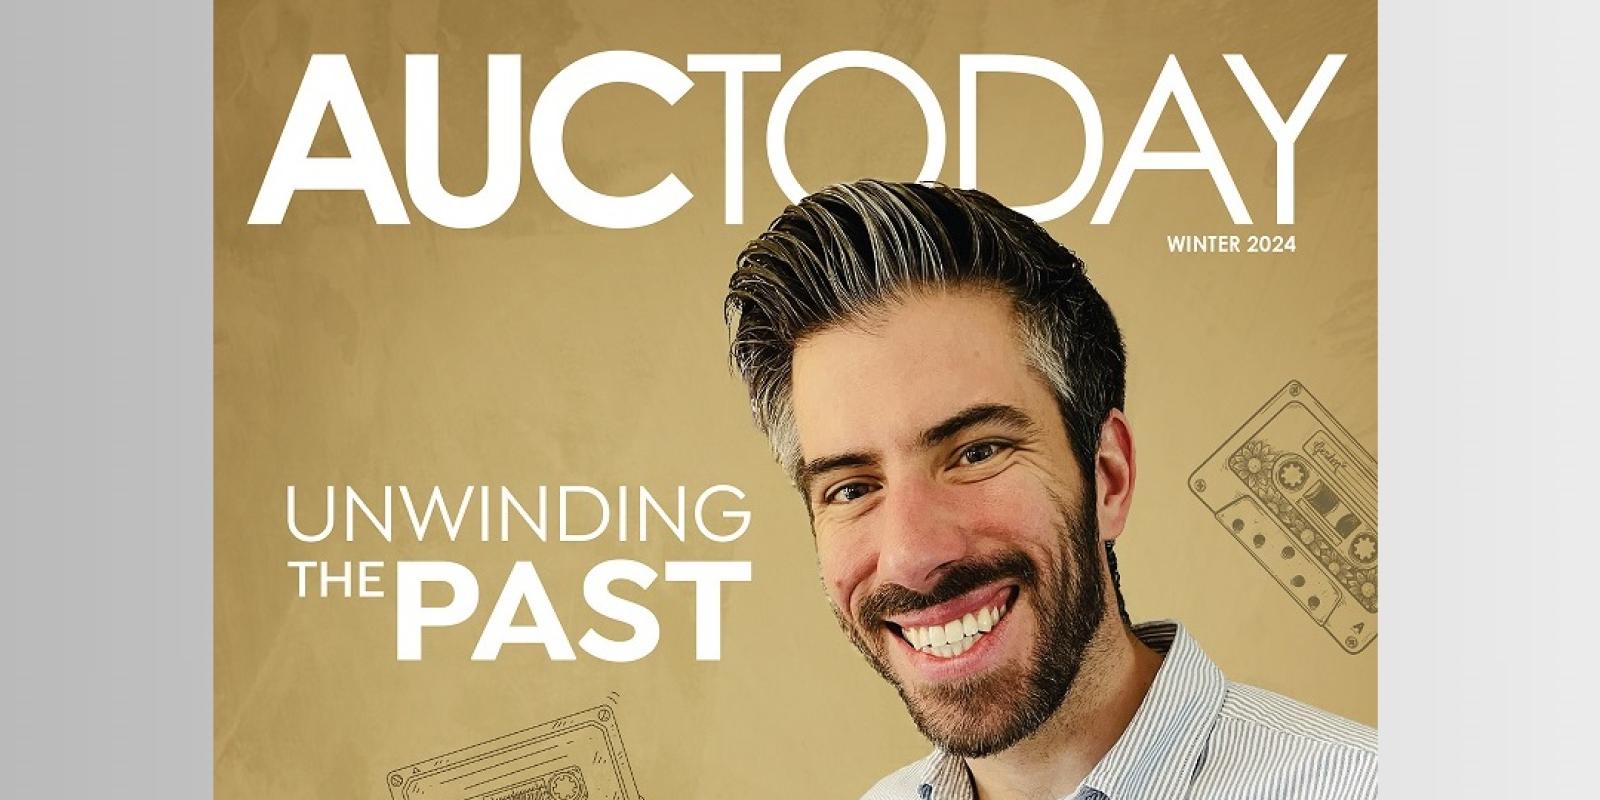 A man is smiling and holding a book, text reads "AUCToday. Unwinding the Past"